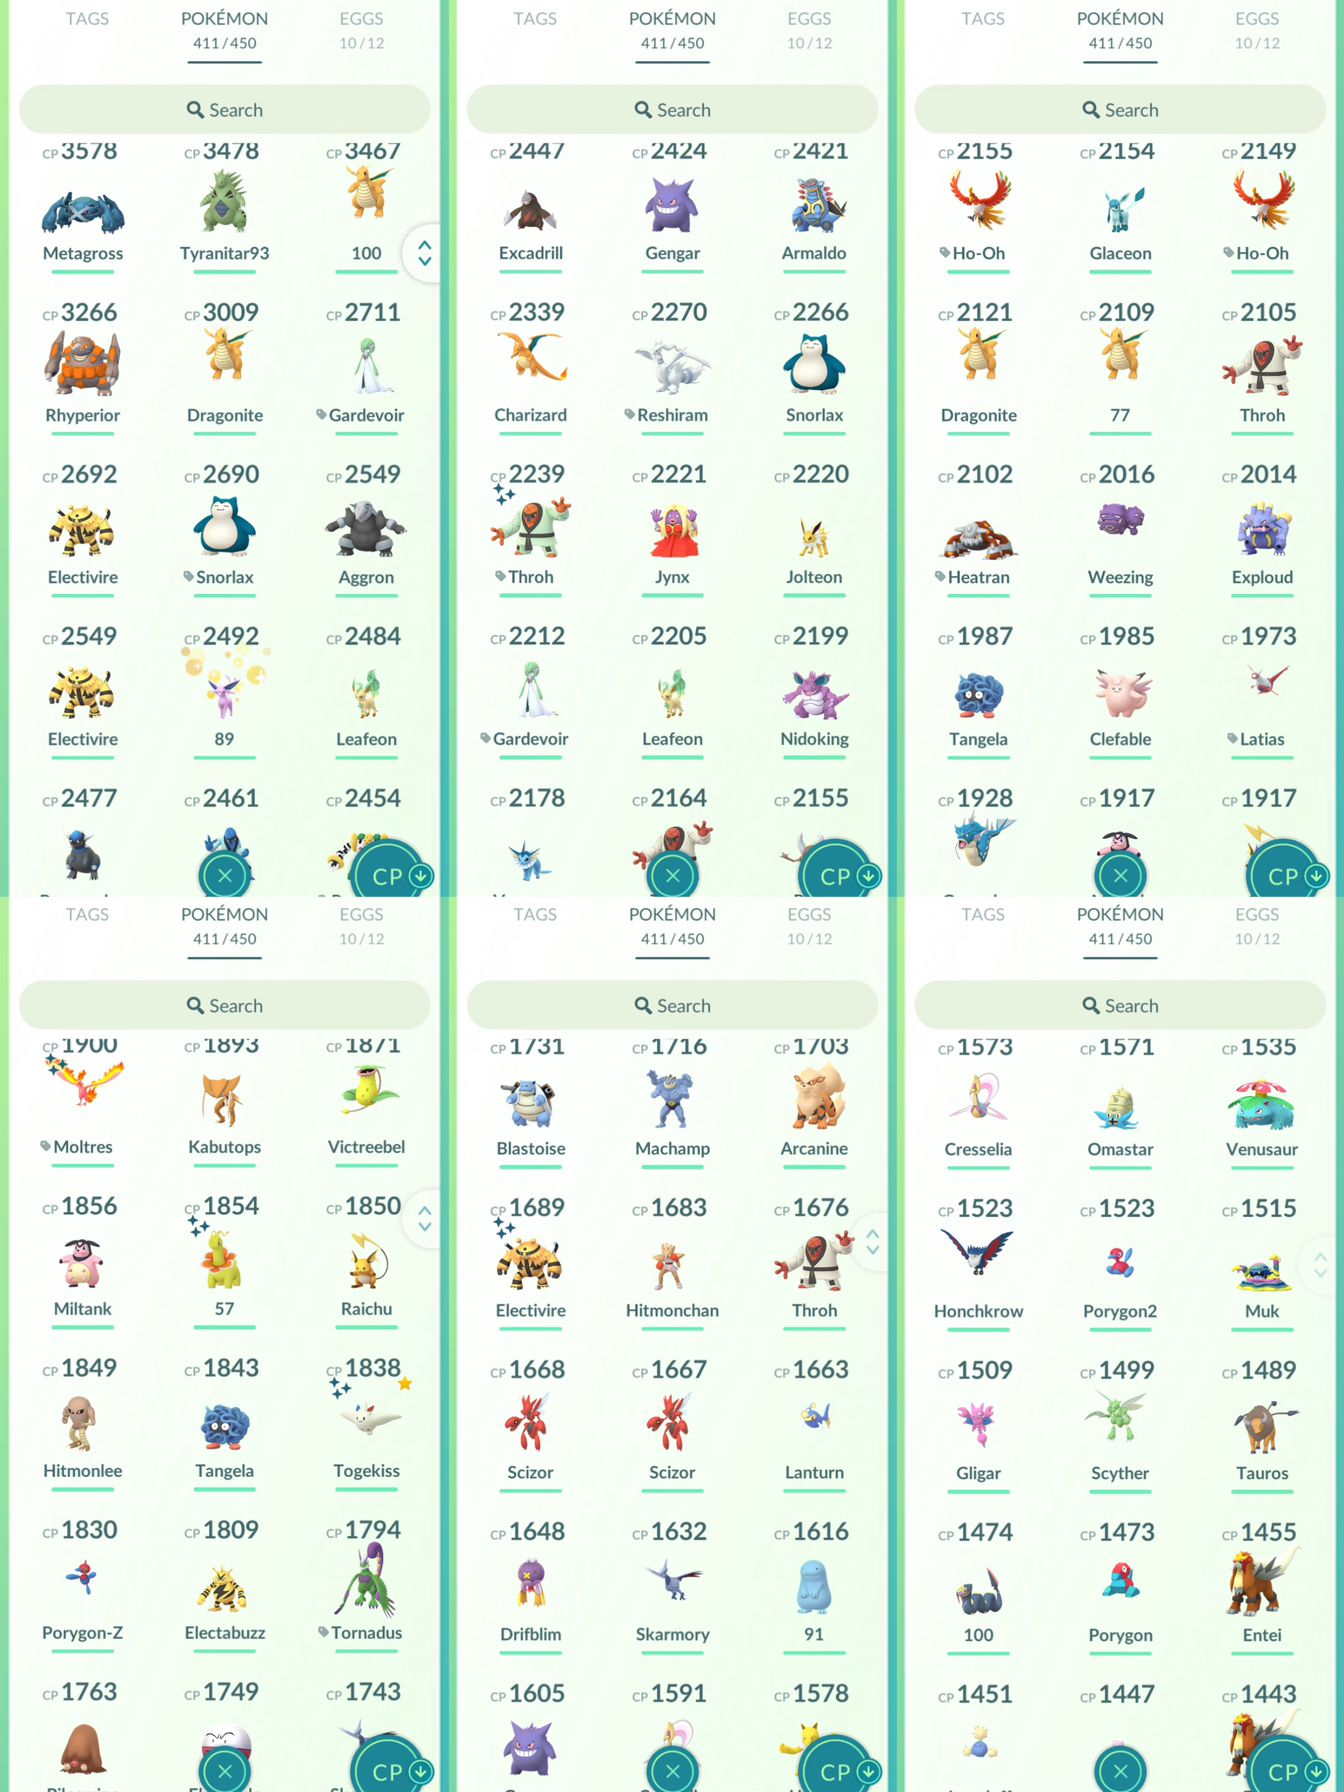 lvl34,have 13 Legendary,28 Shiny,have many nice high CP pokemons,have 100IV Dragonite,N8198